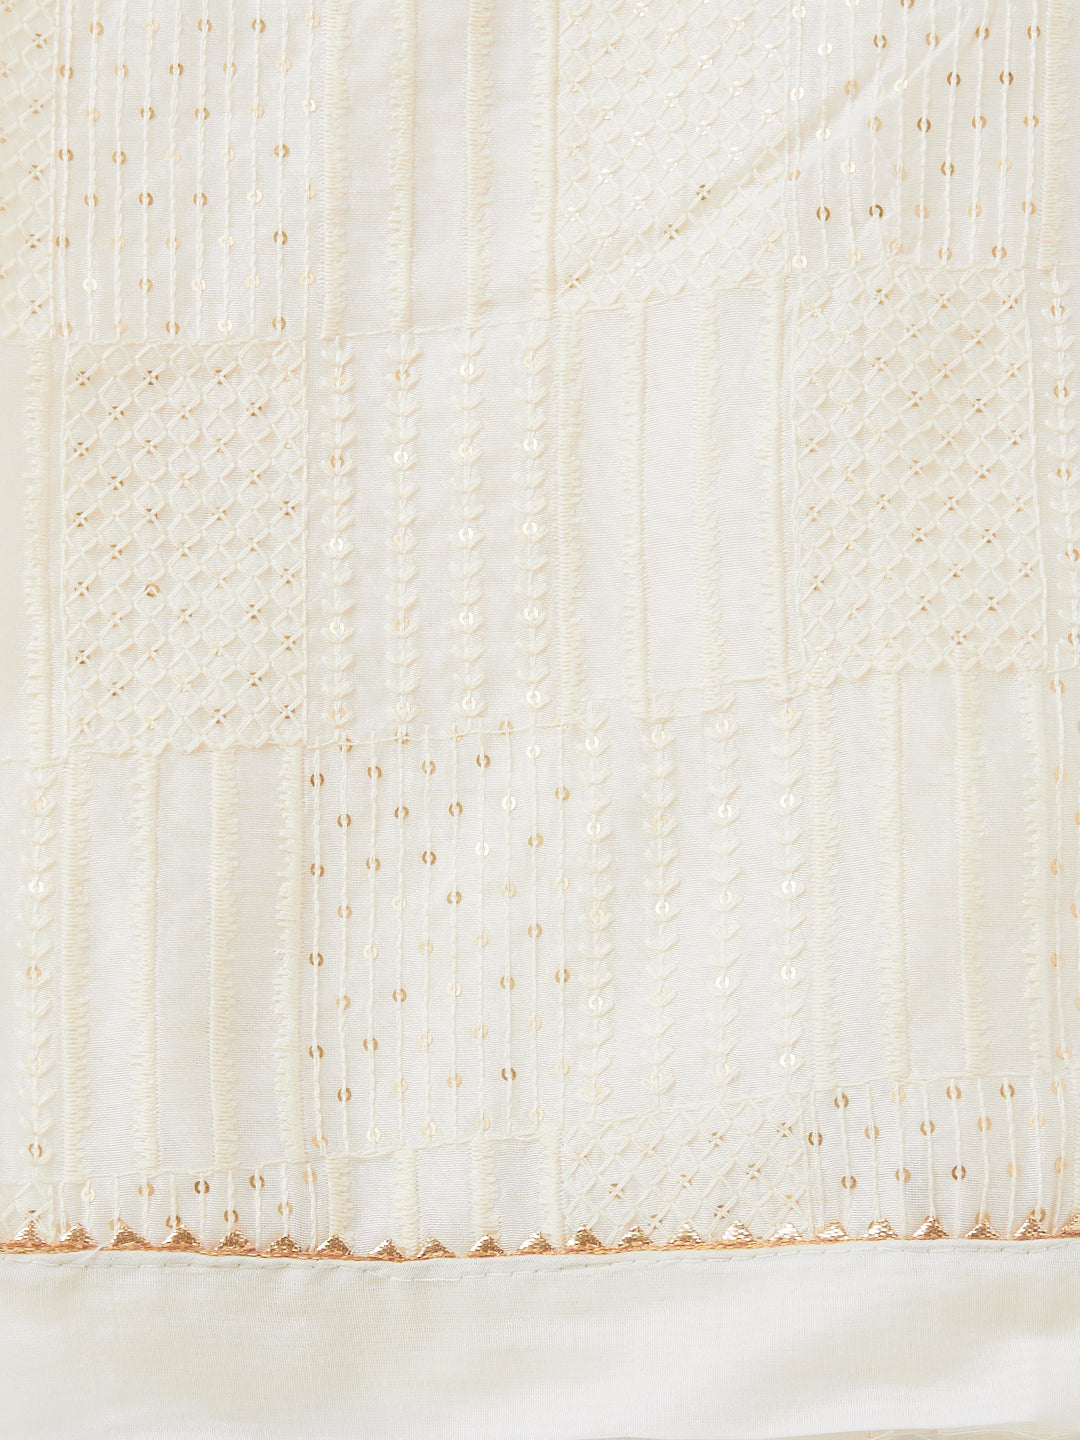 White & Yellow Embellished Unstitch Dress Material with Dupatta